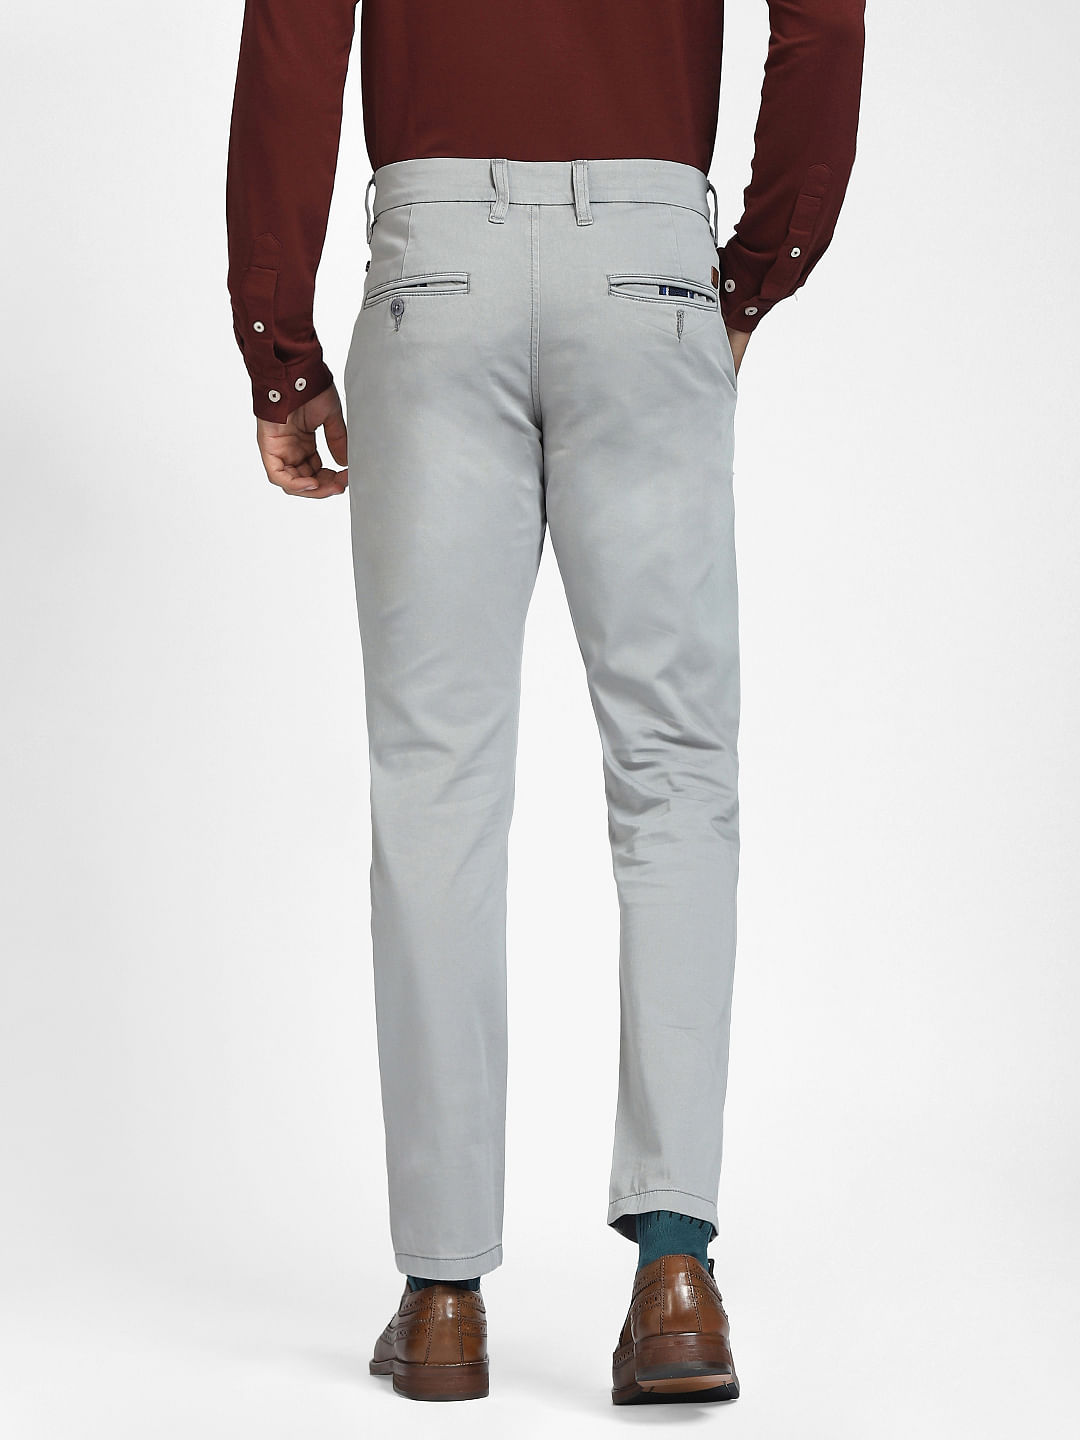 Buy The Alloy Formal and casual Pant online for men  Beyours